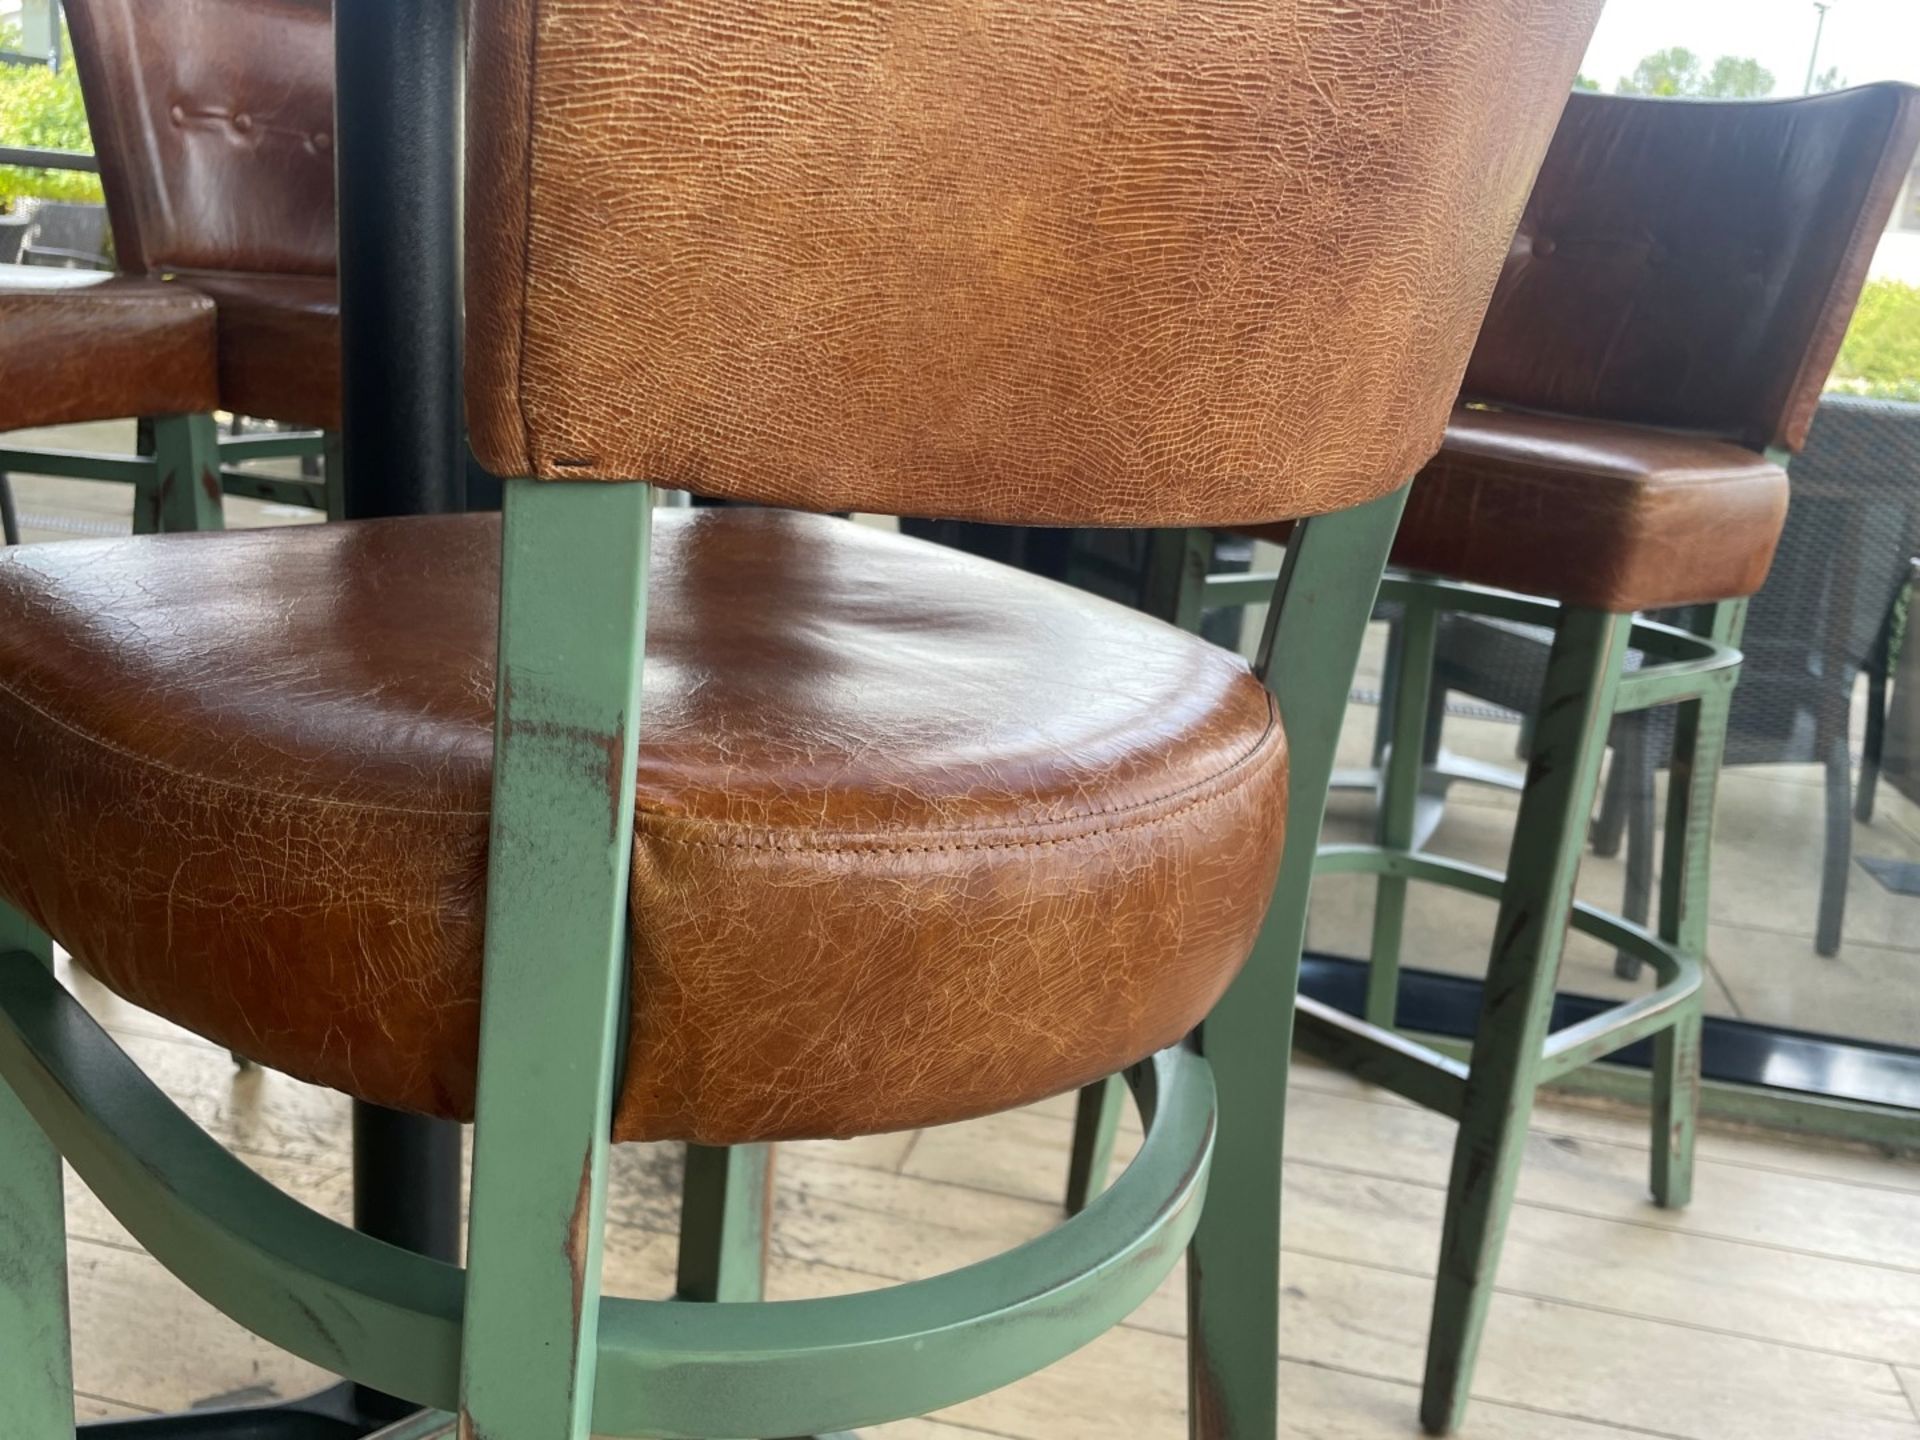 4 x Commercial Restaurant Bar Stools Featuring Wooden Frames With a Distressed Finish and Tan - Image 15 of 15